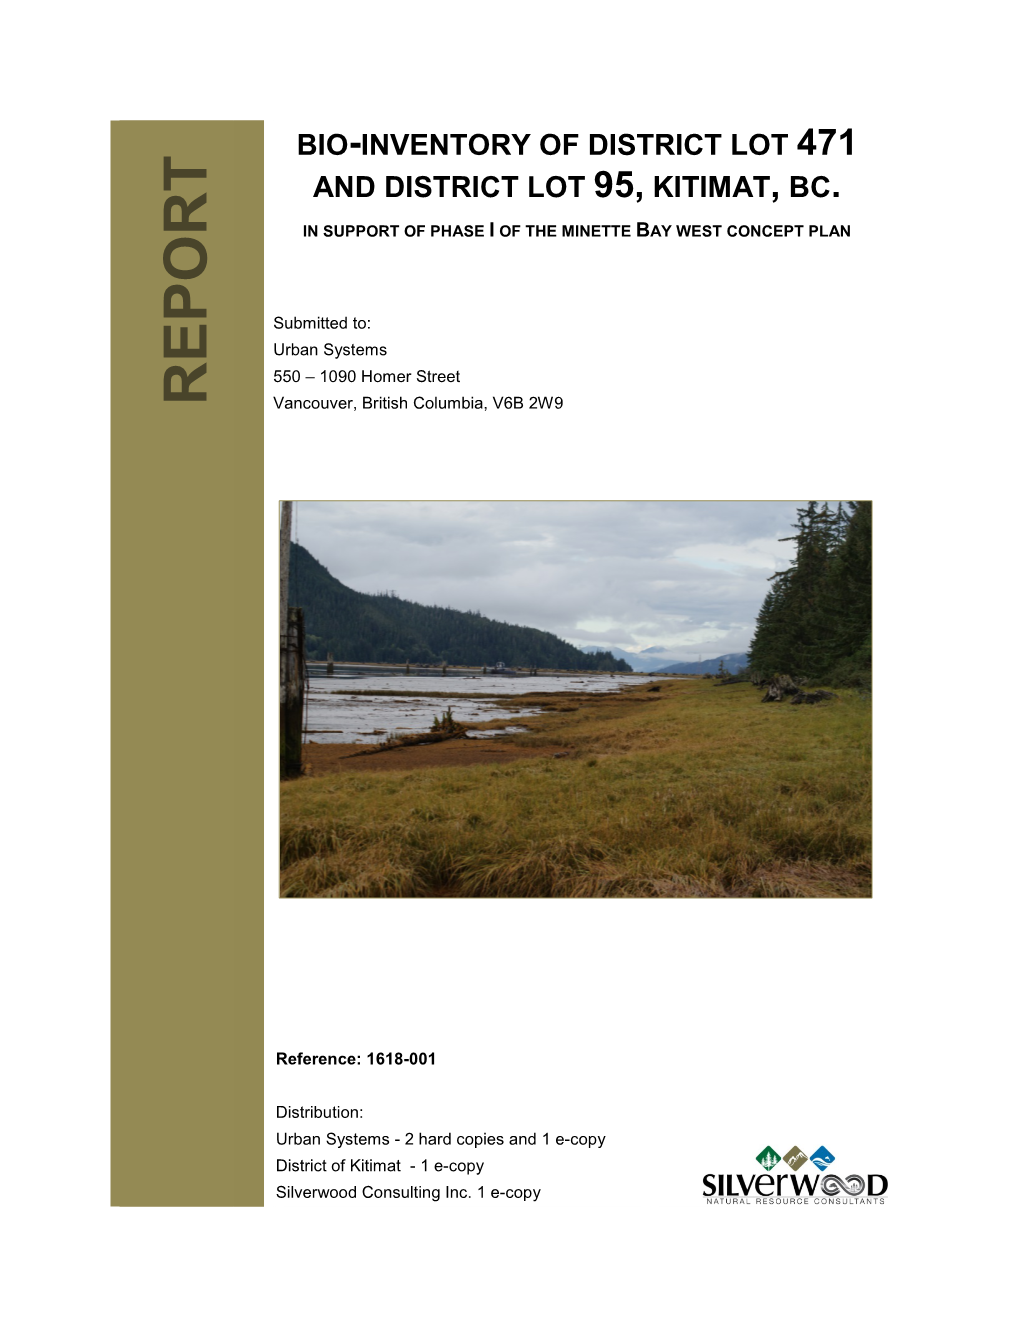 Bio-Inventory of District Lot 471 and District Lot 95, Kitimat, Bc